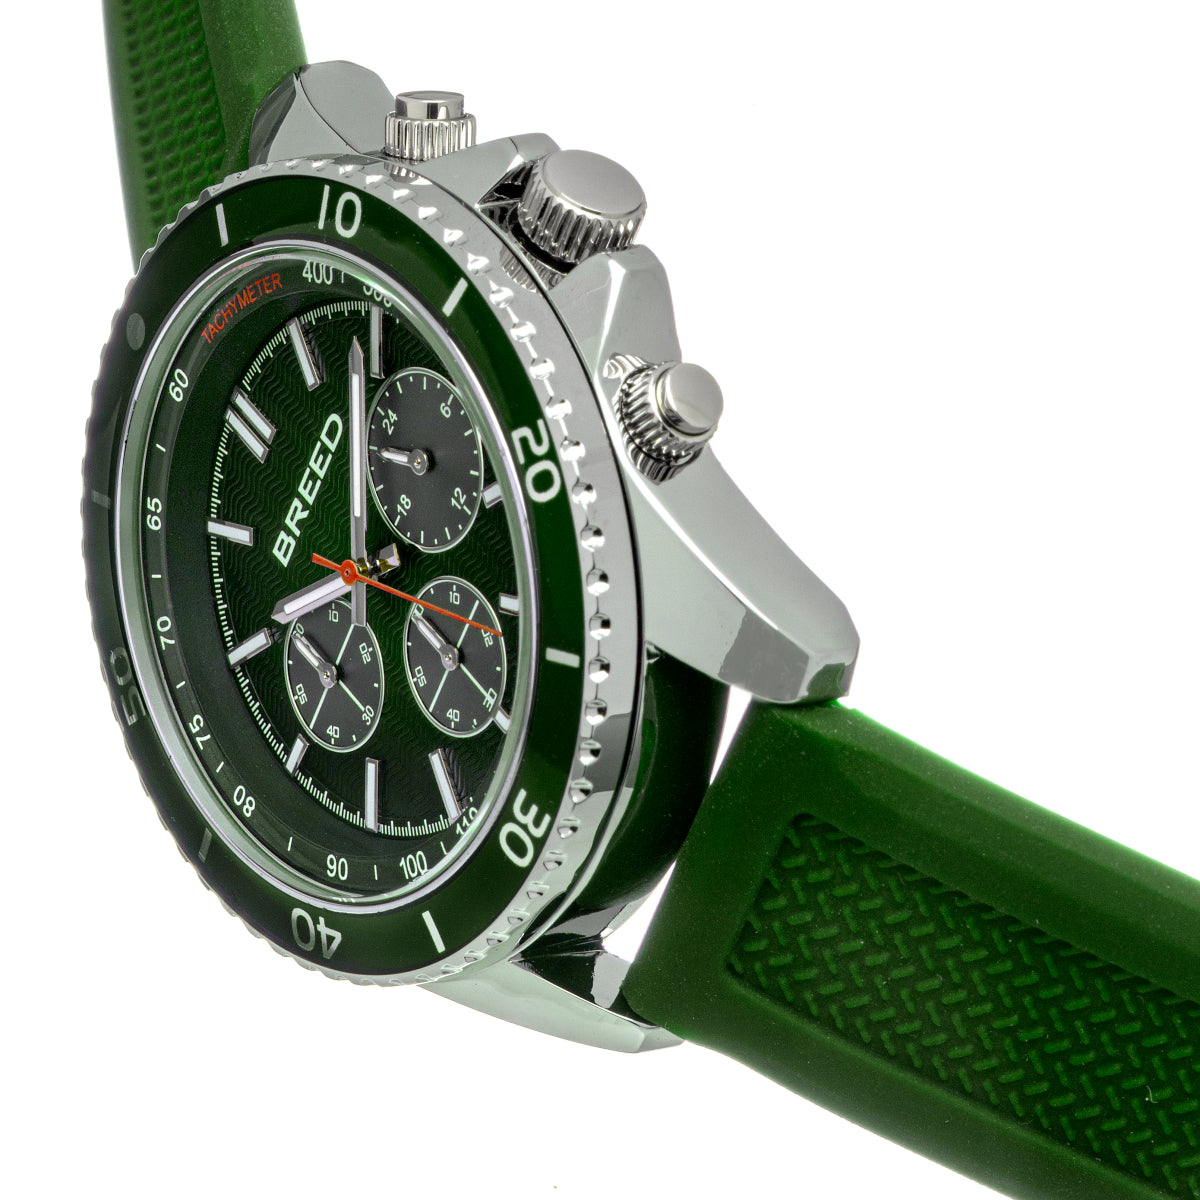 Breed Tempo Chronograph Strap Watch - Green - BRD9101